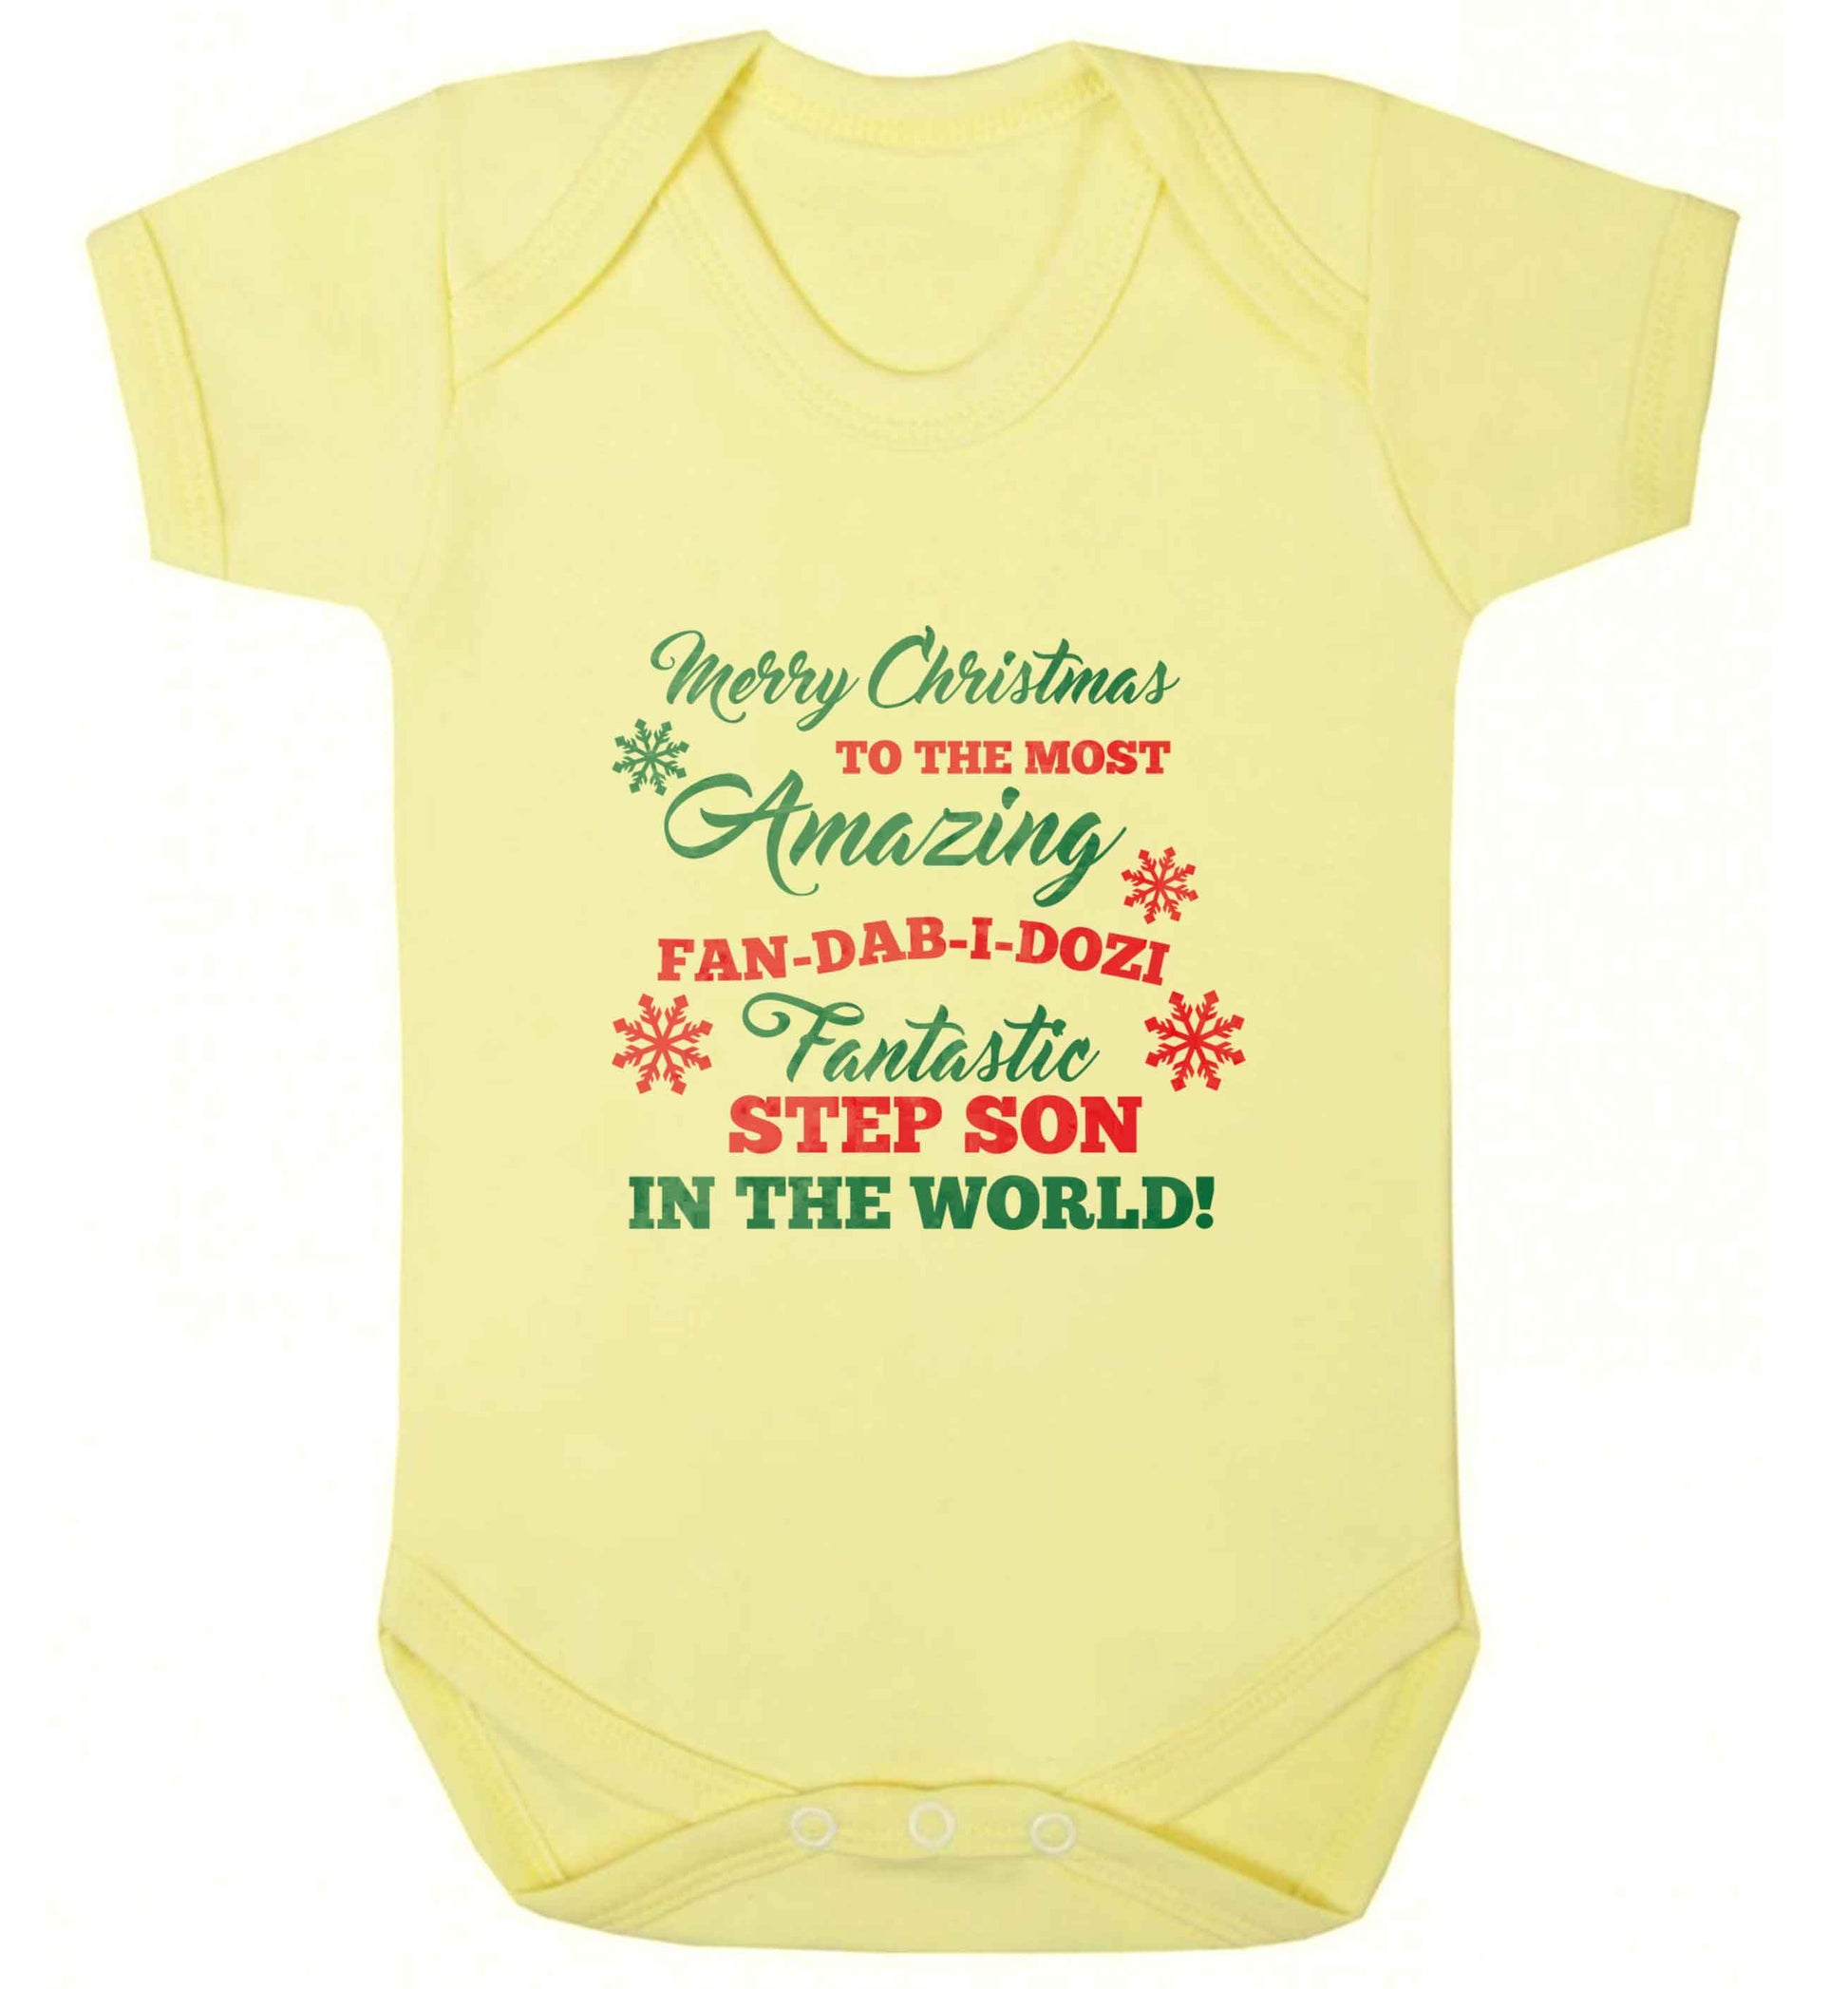 Merry Christmas to the most amazing fan-dab-i-dozi fantasic Step Son in the world baby vest pale yellow 18-24 months